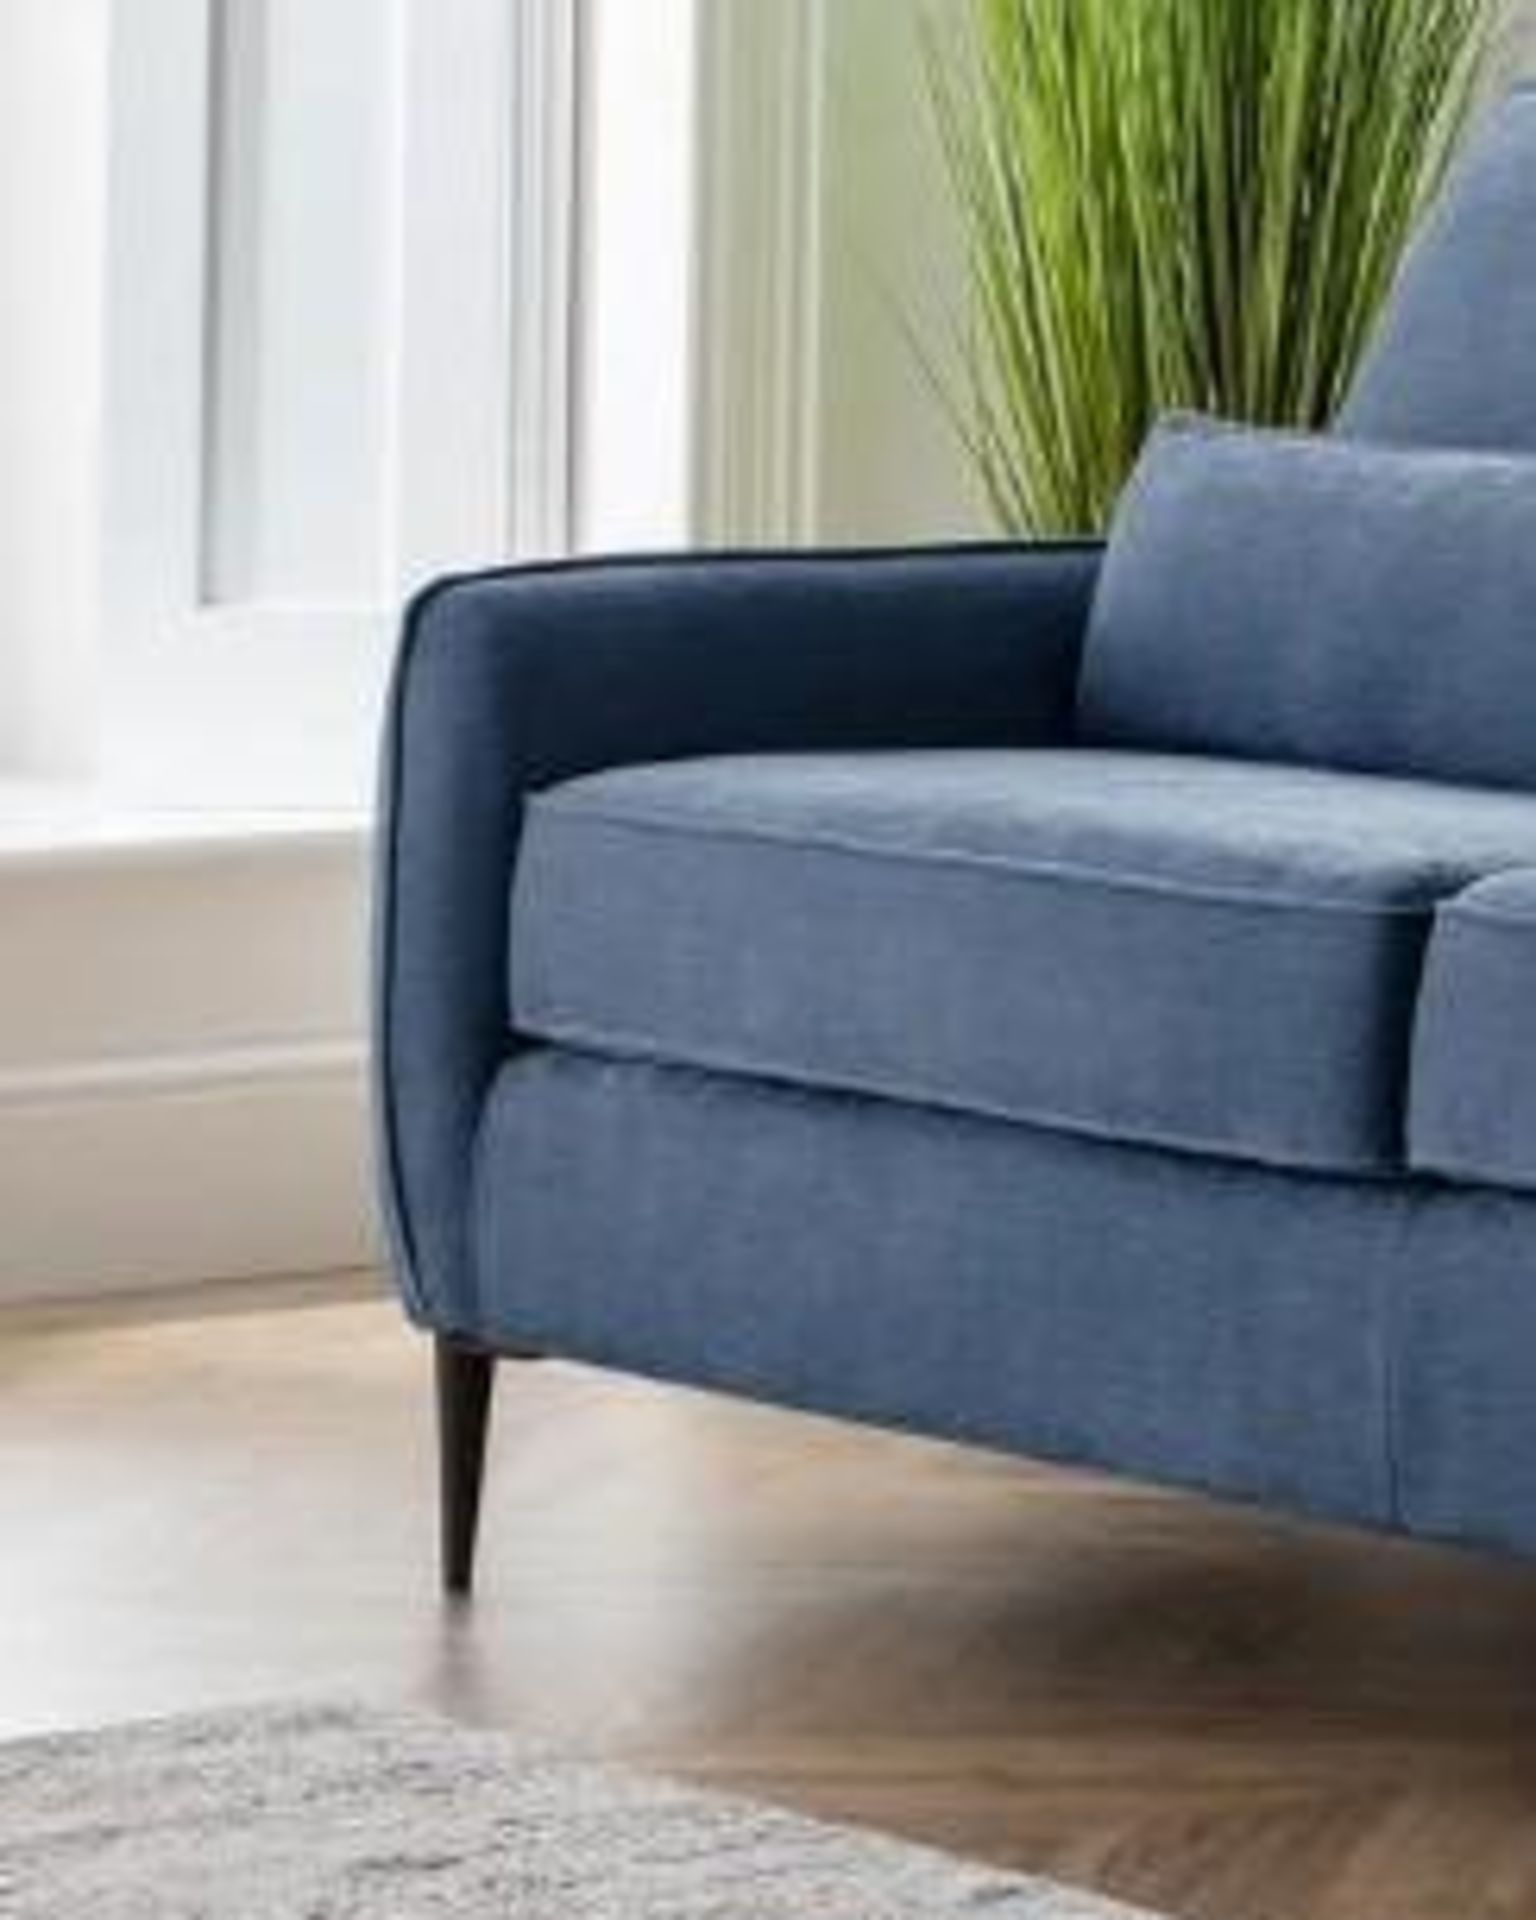 Brand new Boxed 3 Seater Rhonda Sofa in Navy - Image 2 of 3